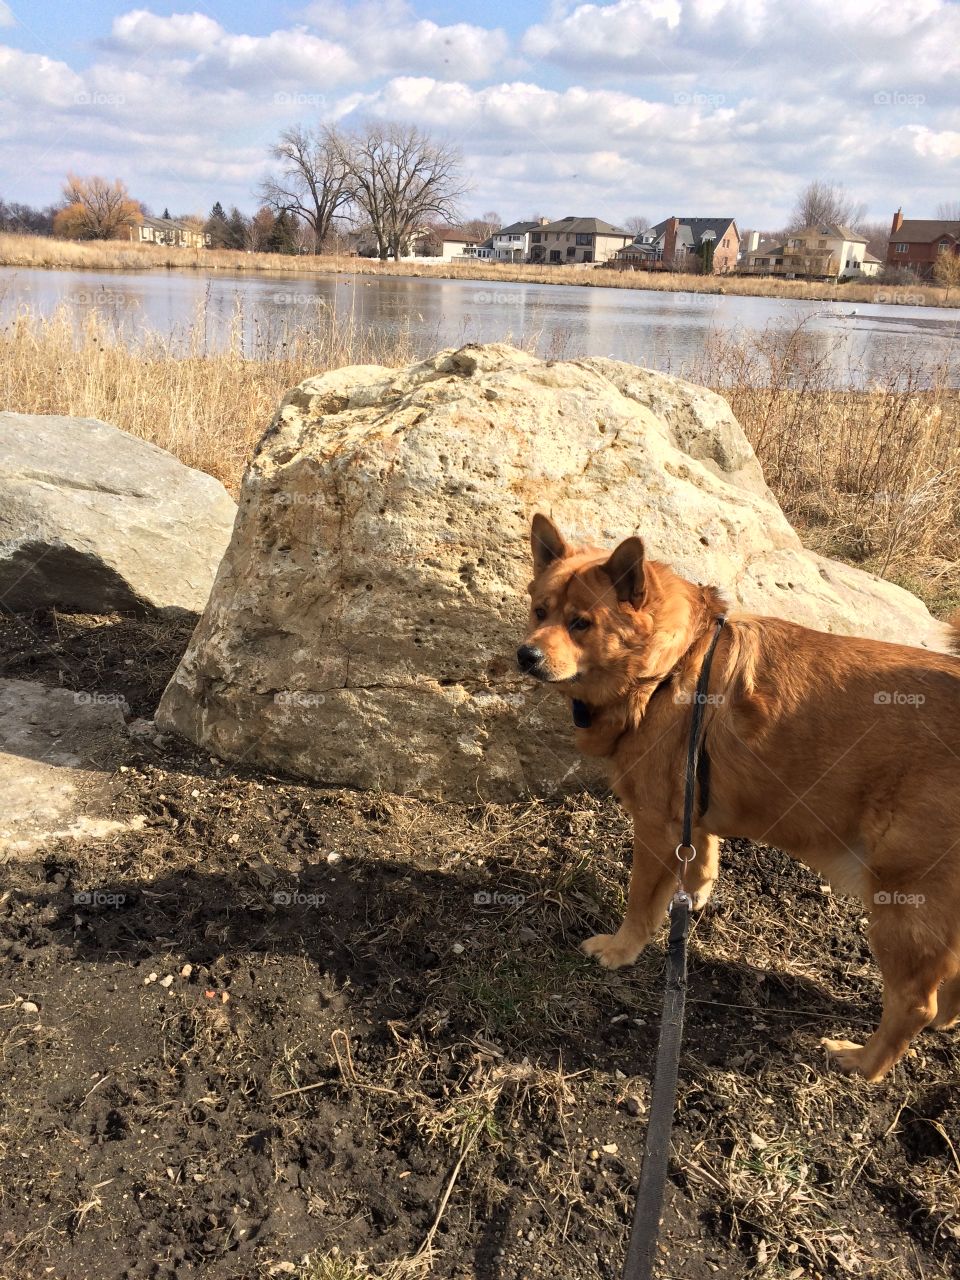 My adventurous dog who loves hiking up canyons and mountains, has yet to get on top of that huge boulder! 